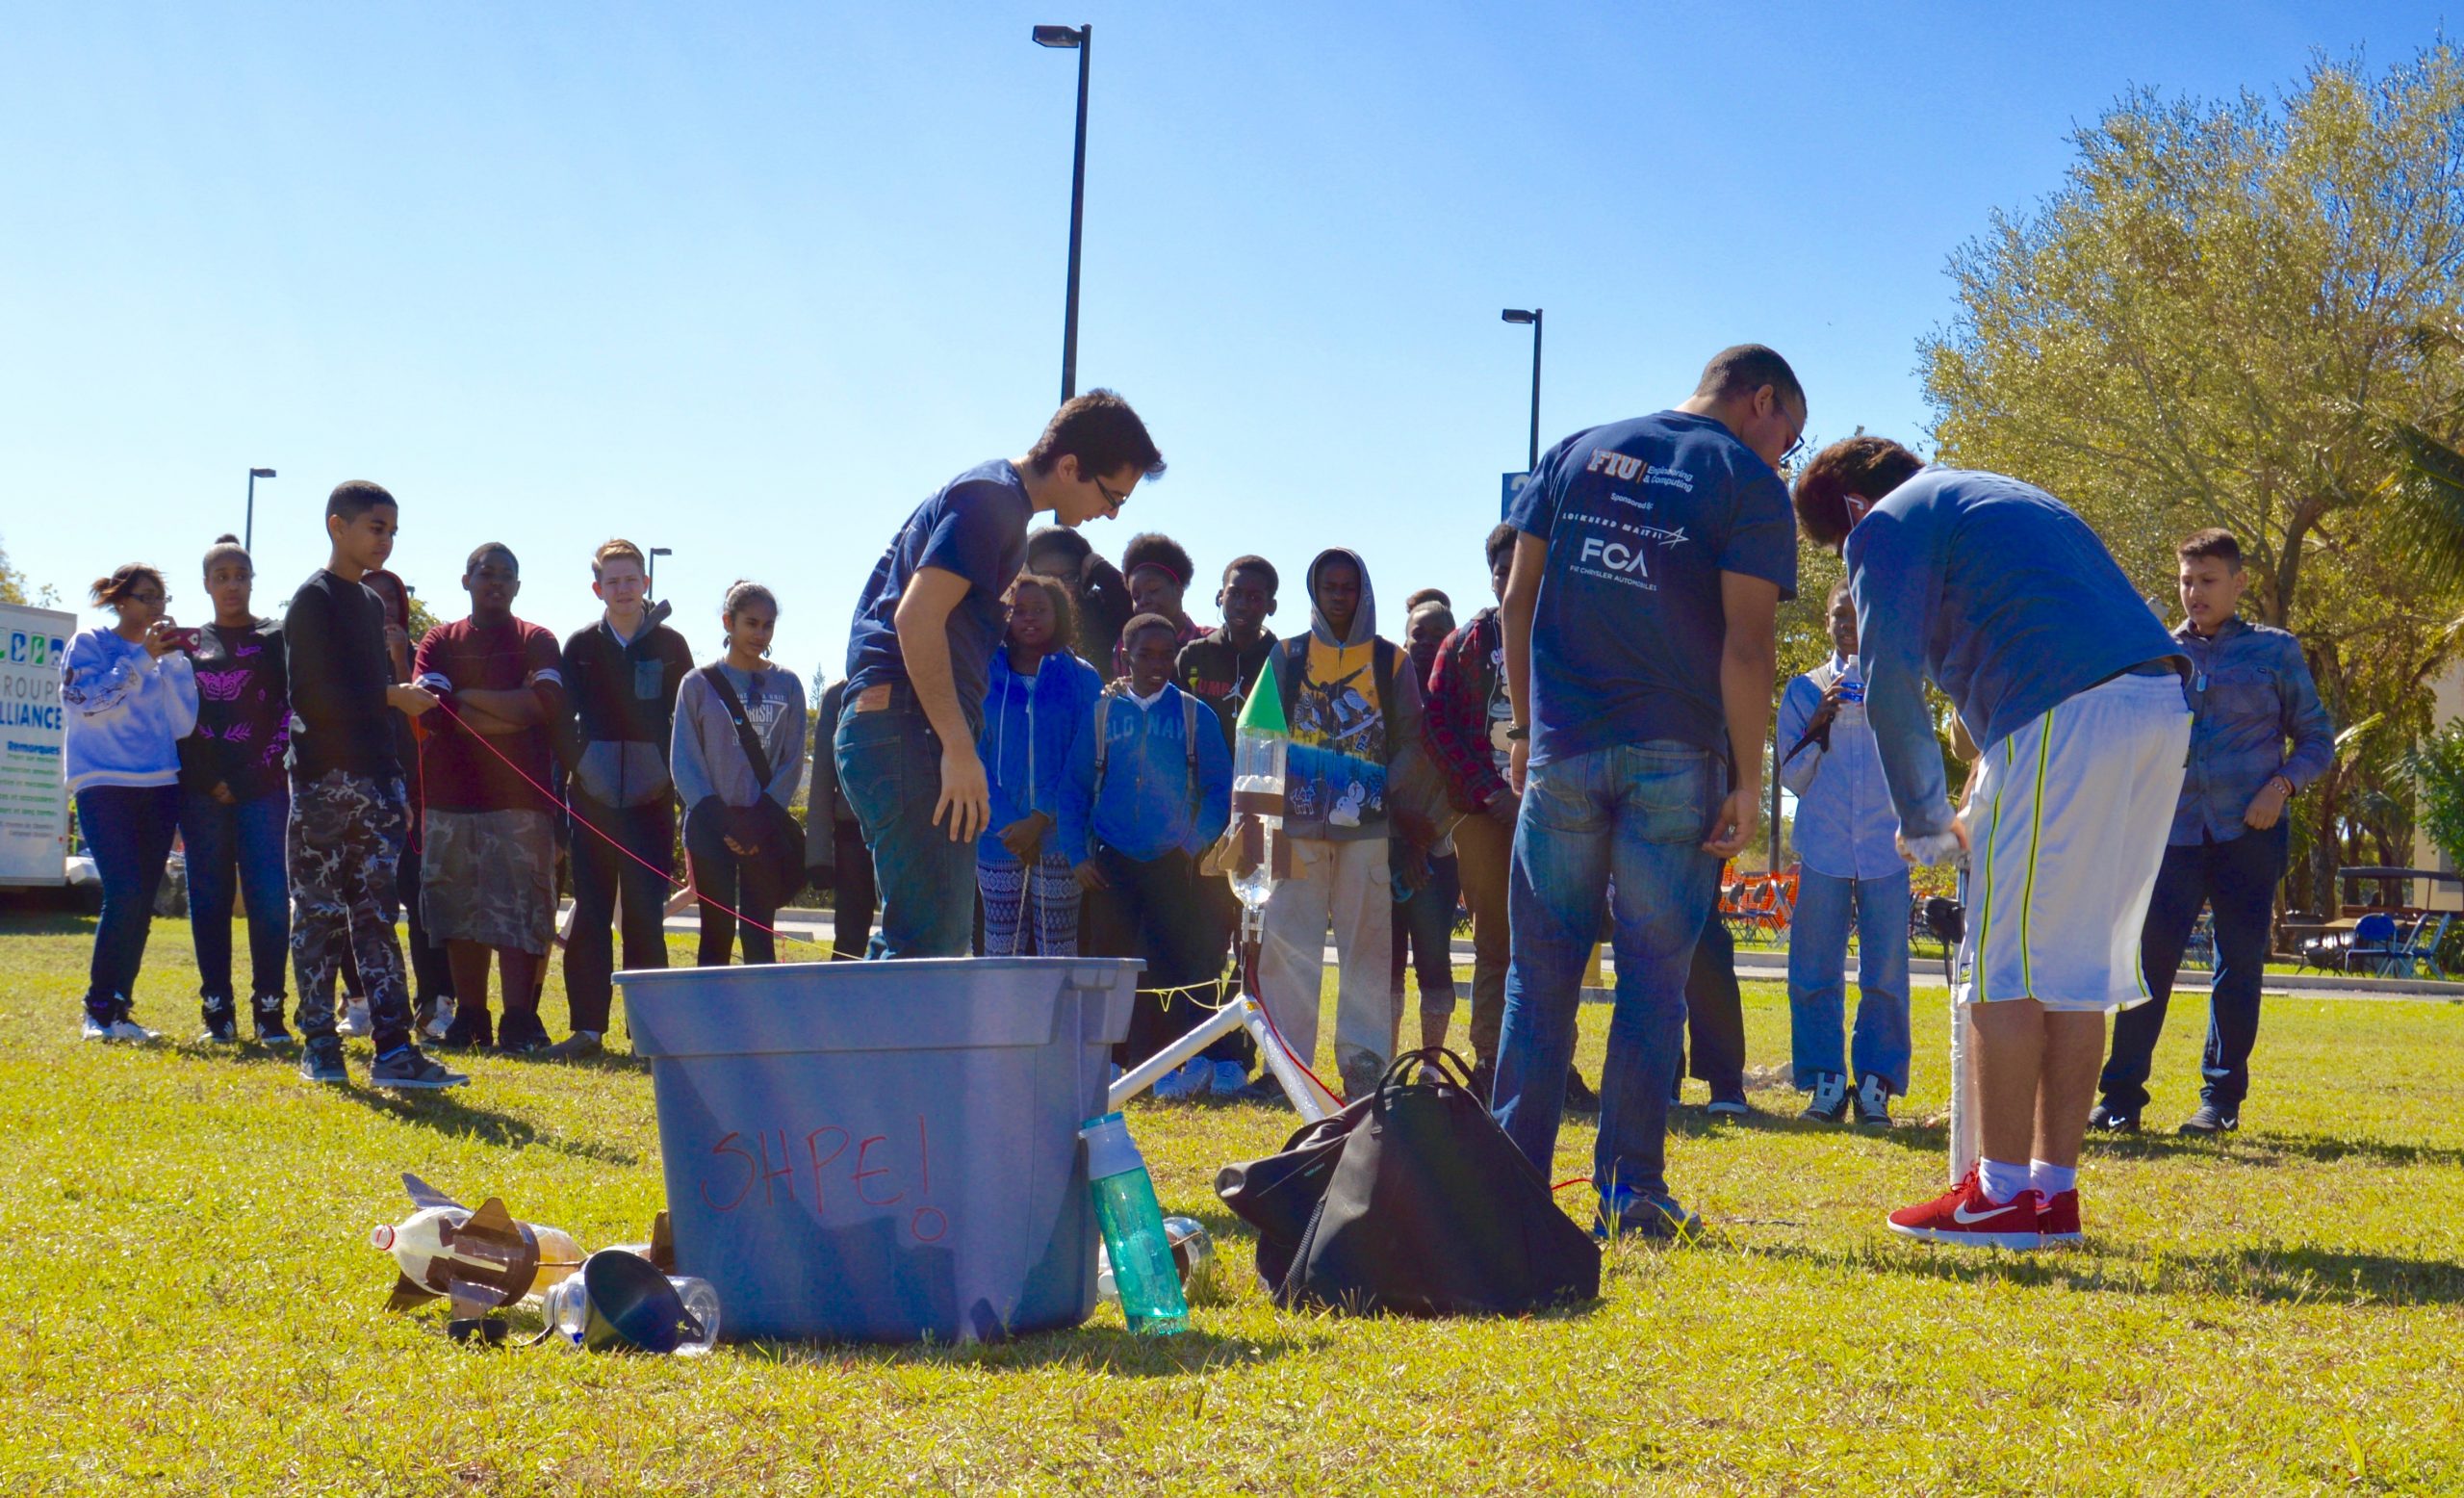 Educational fun takes center stage at 2016 Engineering Expo